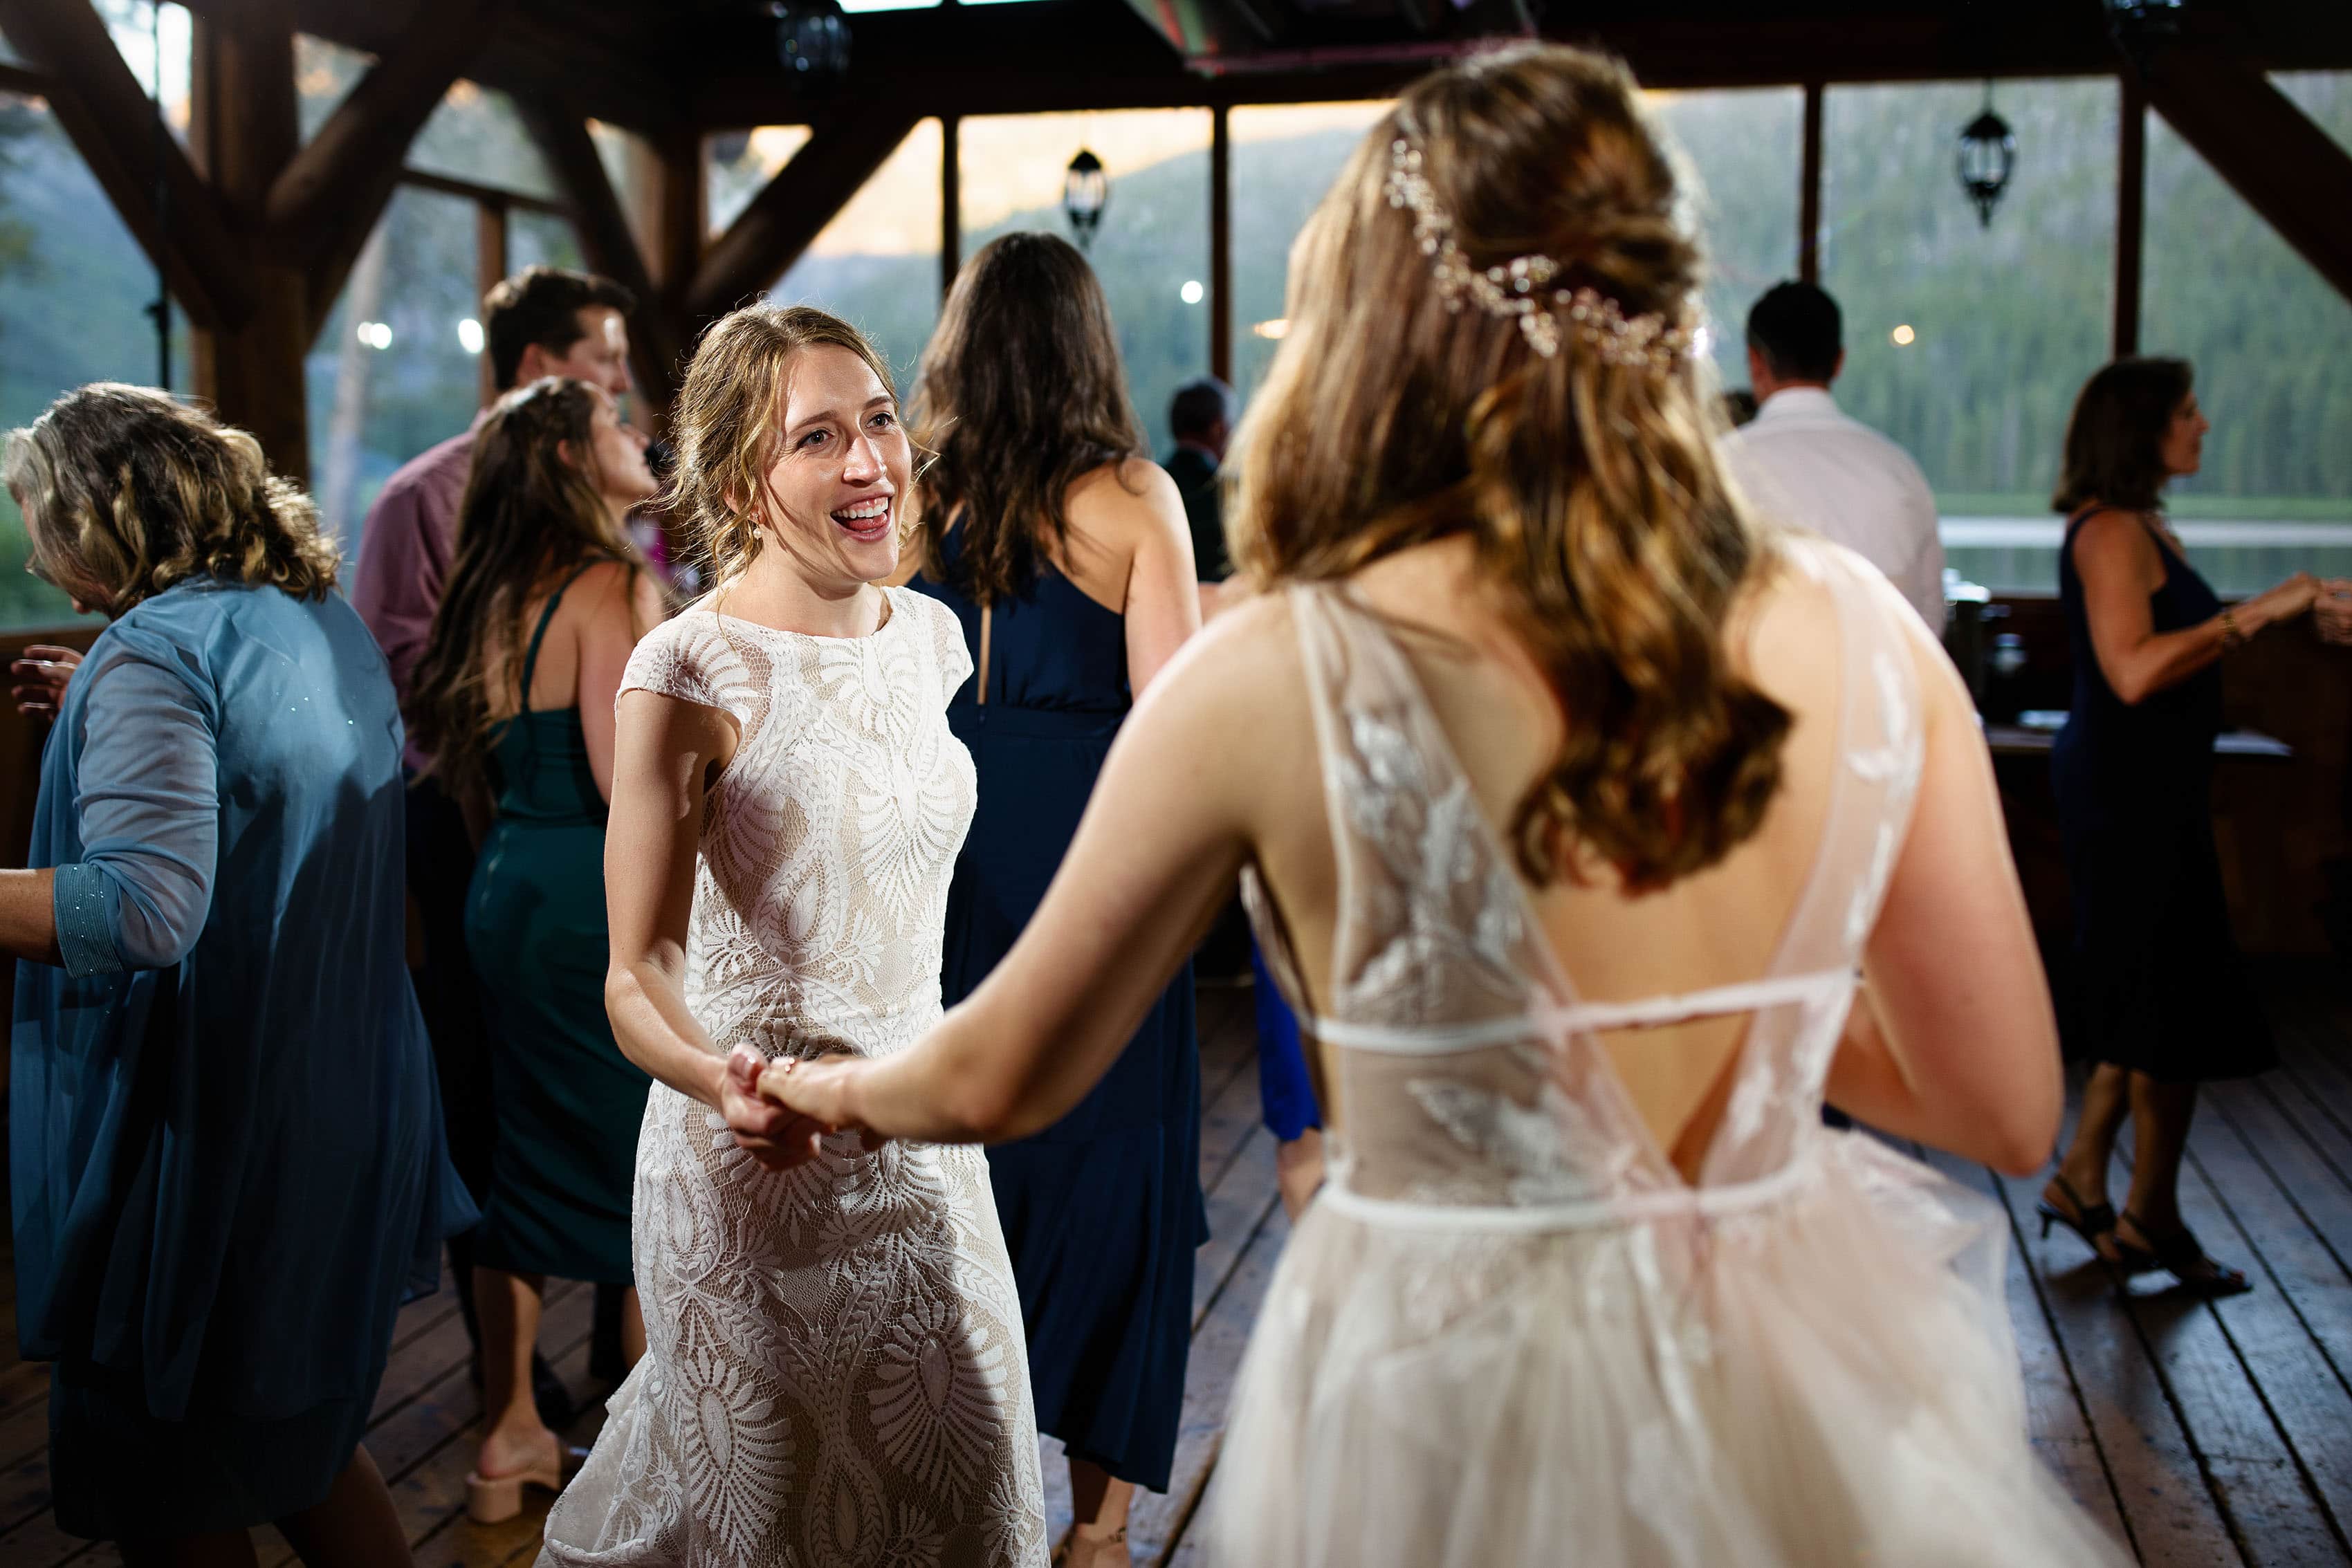 Guests dance during a wedding reception at Piney River Ranch